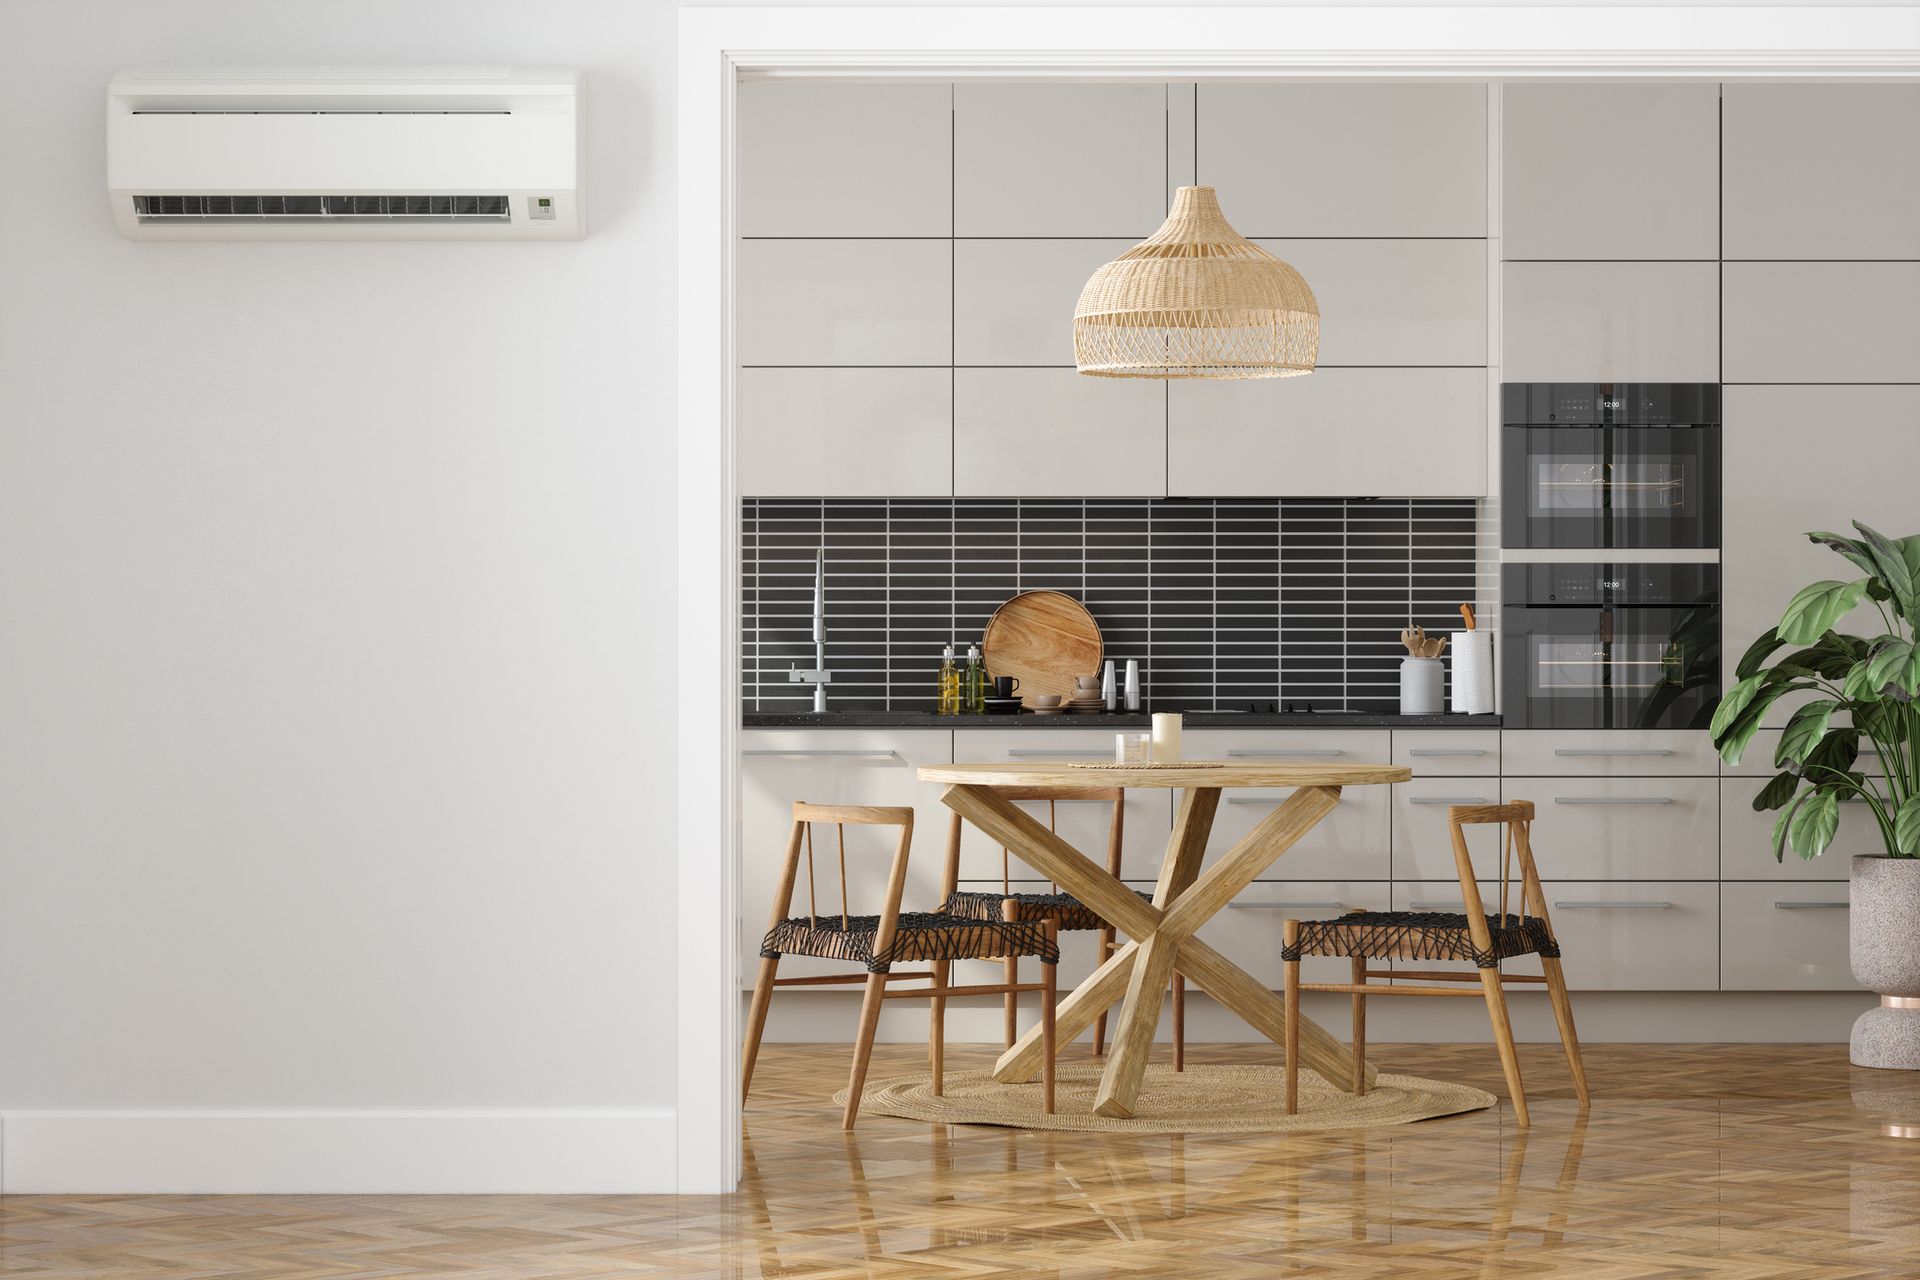 Air Conditioner On Empty Wall With Modern Kitchen Interior Background.